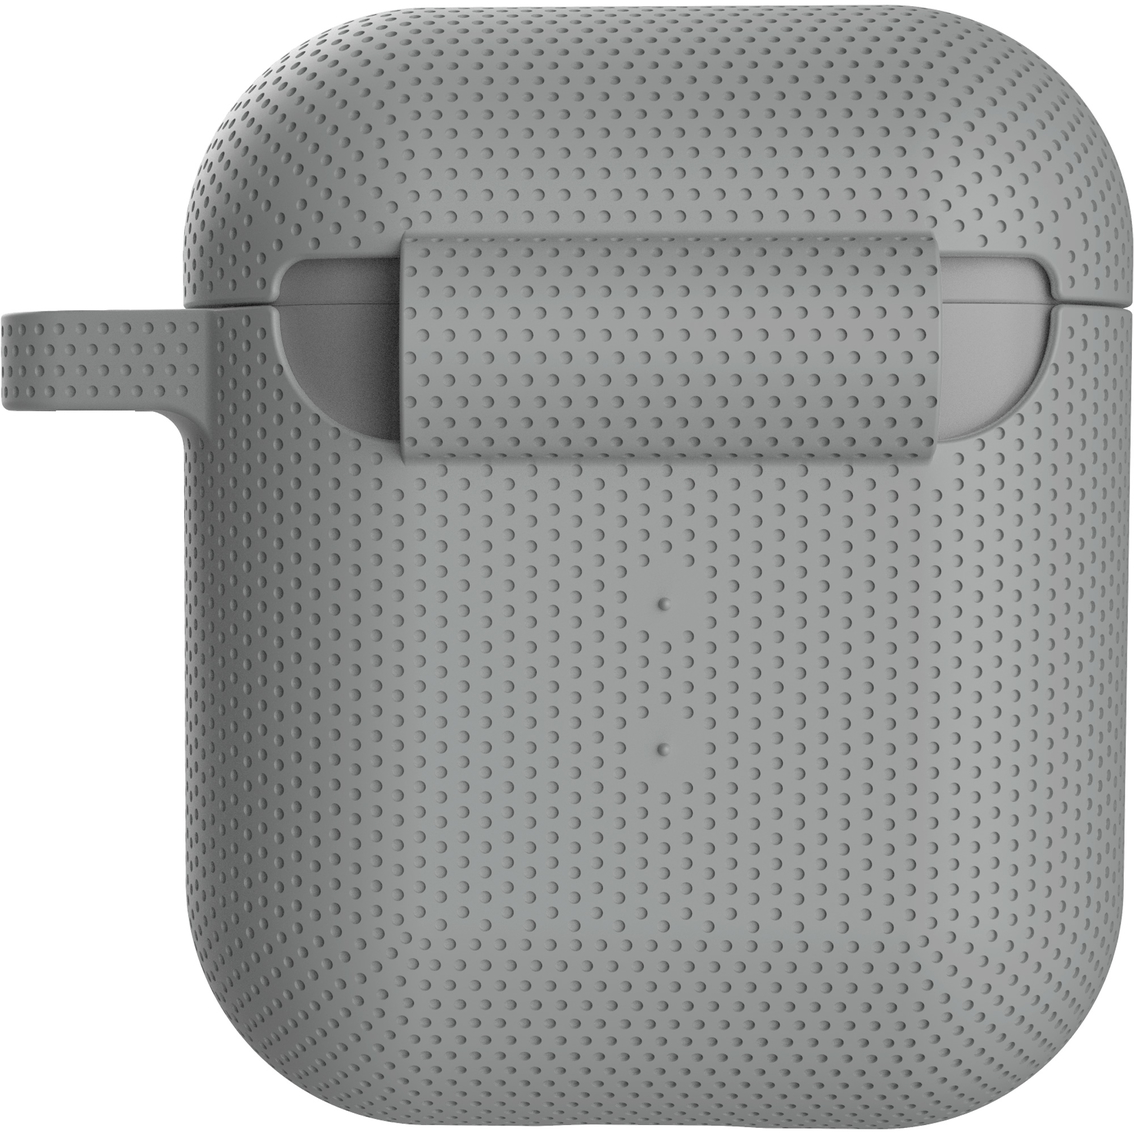 U by UAG Silicone Case for Apple AirPods - Image 4 of 4